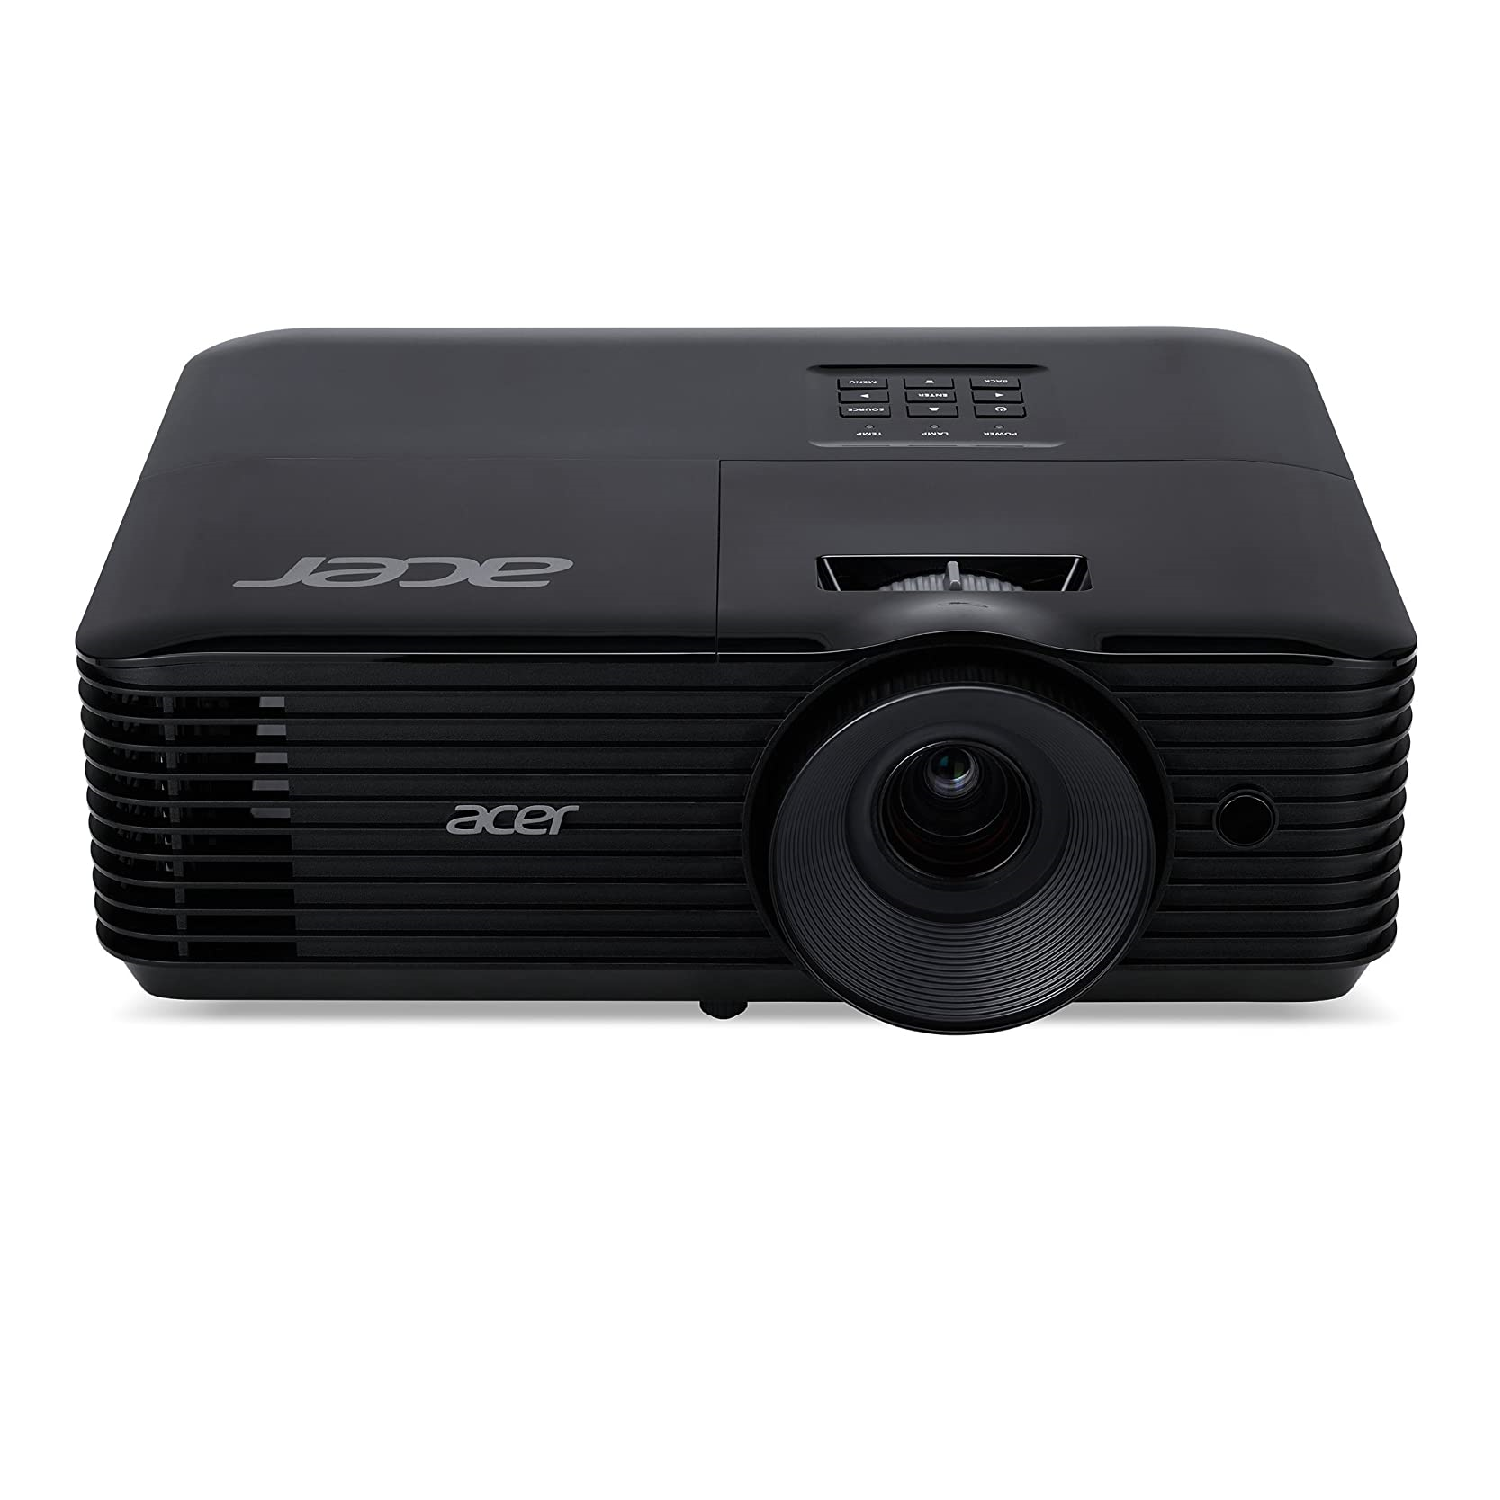 SVGA High Brightness 4000 Lumens Projector for Home and Office with HDMI Vertical Keystone   X1126AH acer